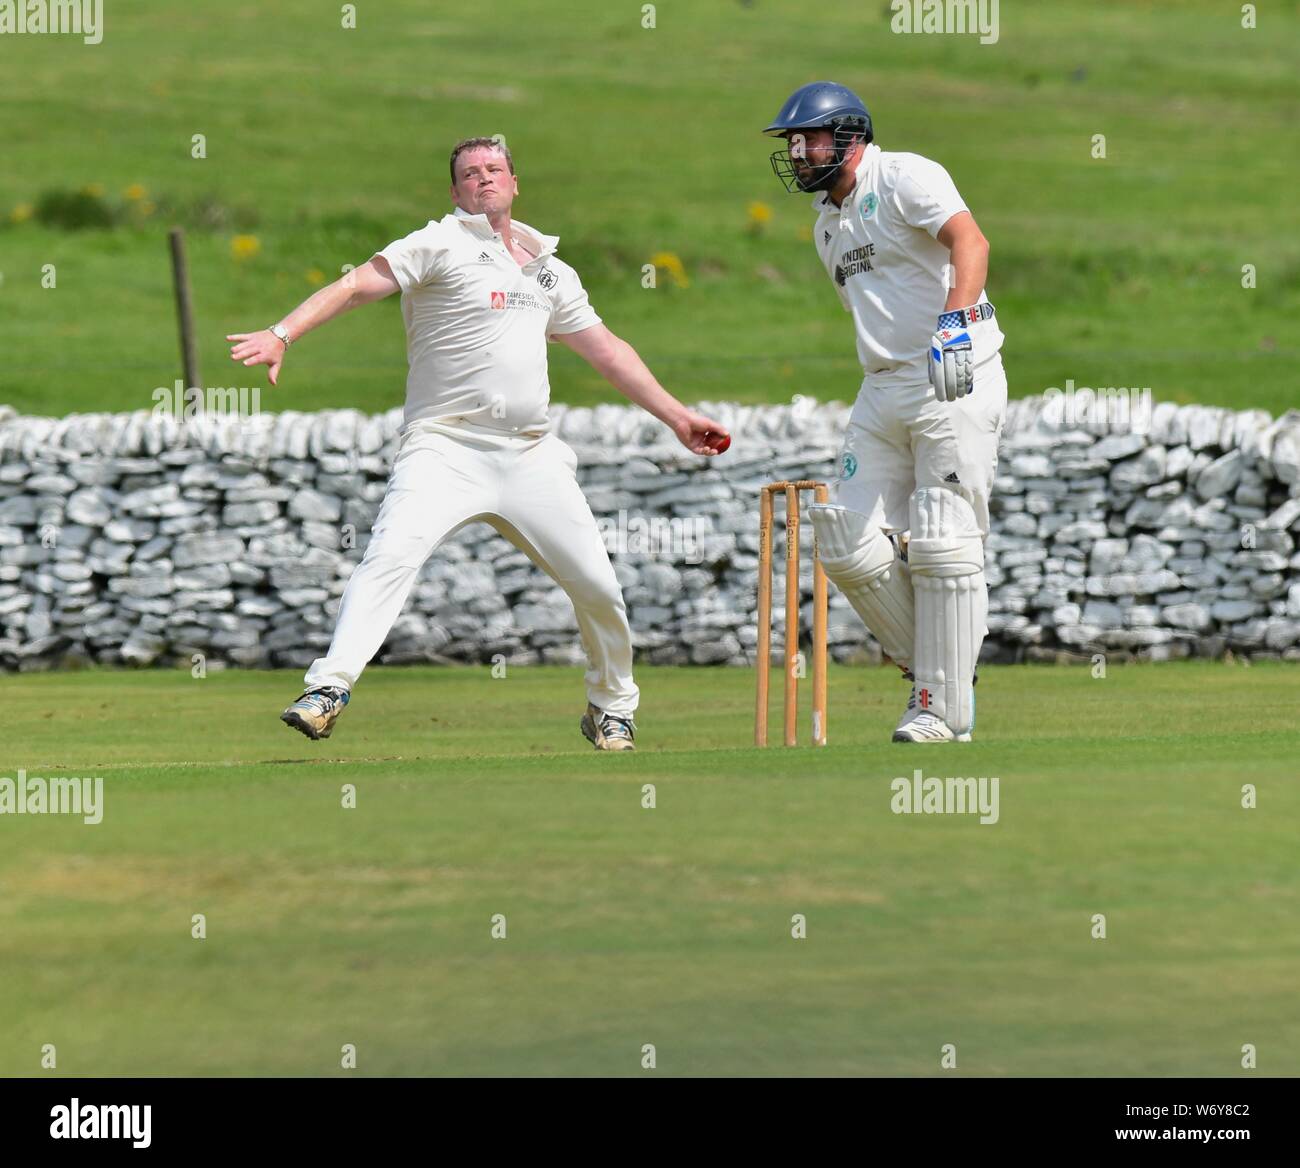 A fast bowler in action in the match between Old Glossop and Tintwistle Stock Photo